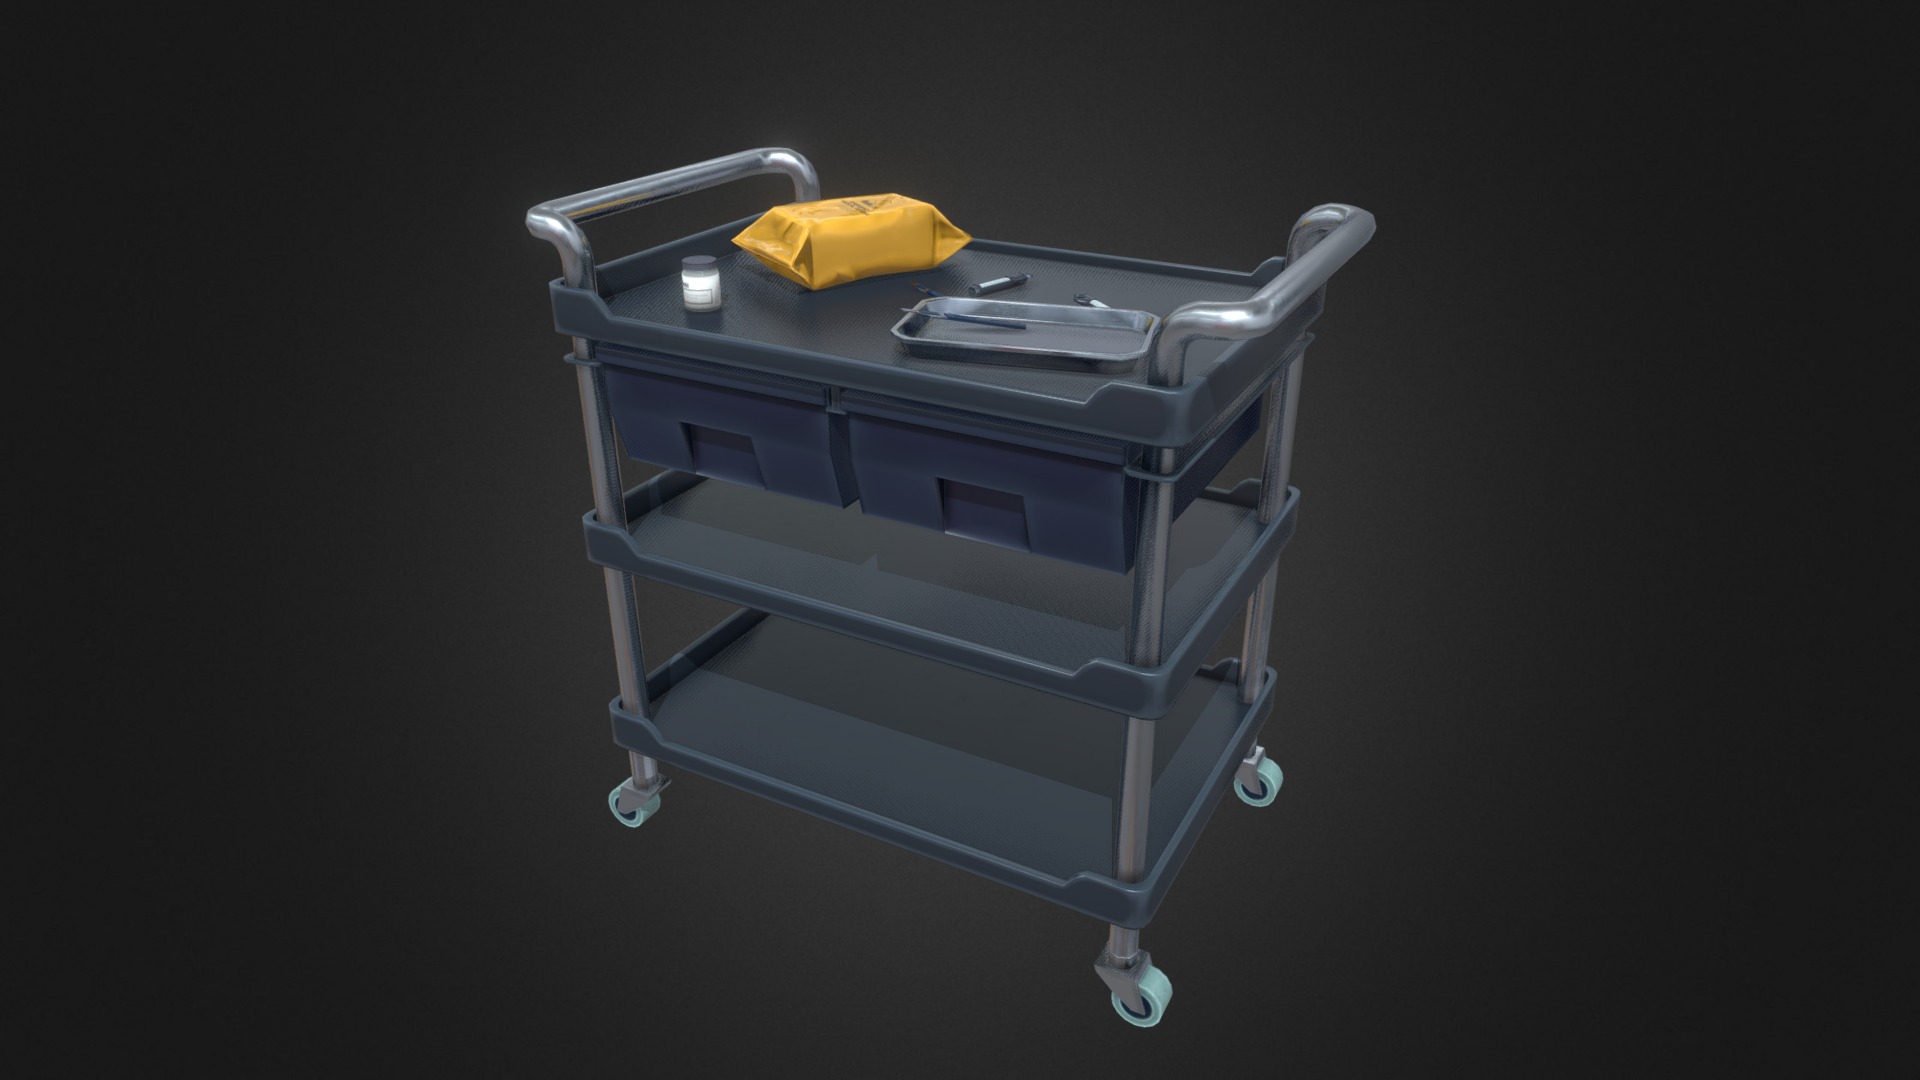 3D model Medical Assets - This is a 3D model of the Medical Assets. The 3D model is about a blue and white shopping cart.